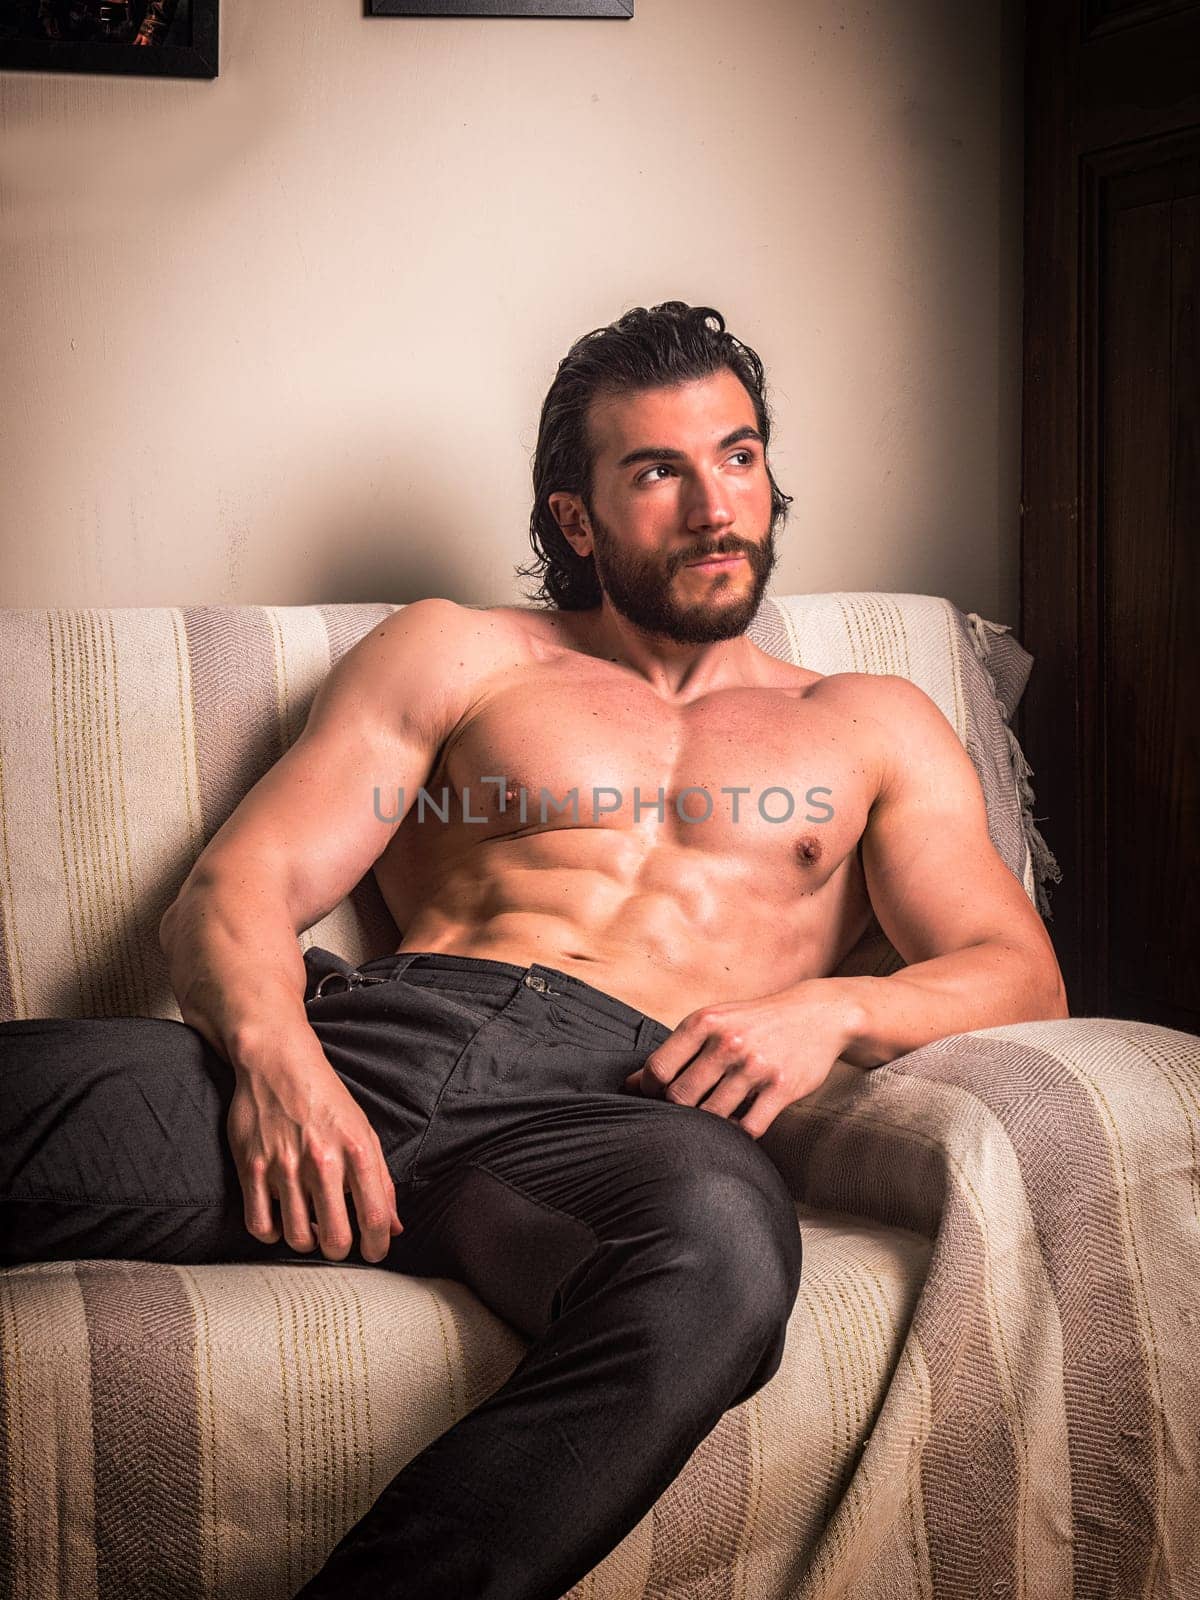 Handsome muscular young man at home laying on couch with shirt open on naked torso, an expression of tranquility, looking away, in a health and fitness concept